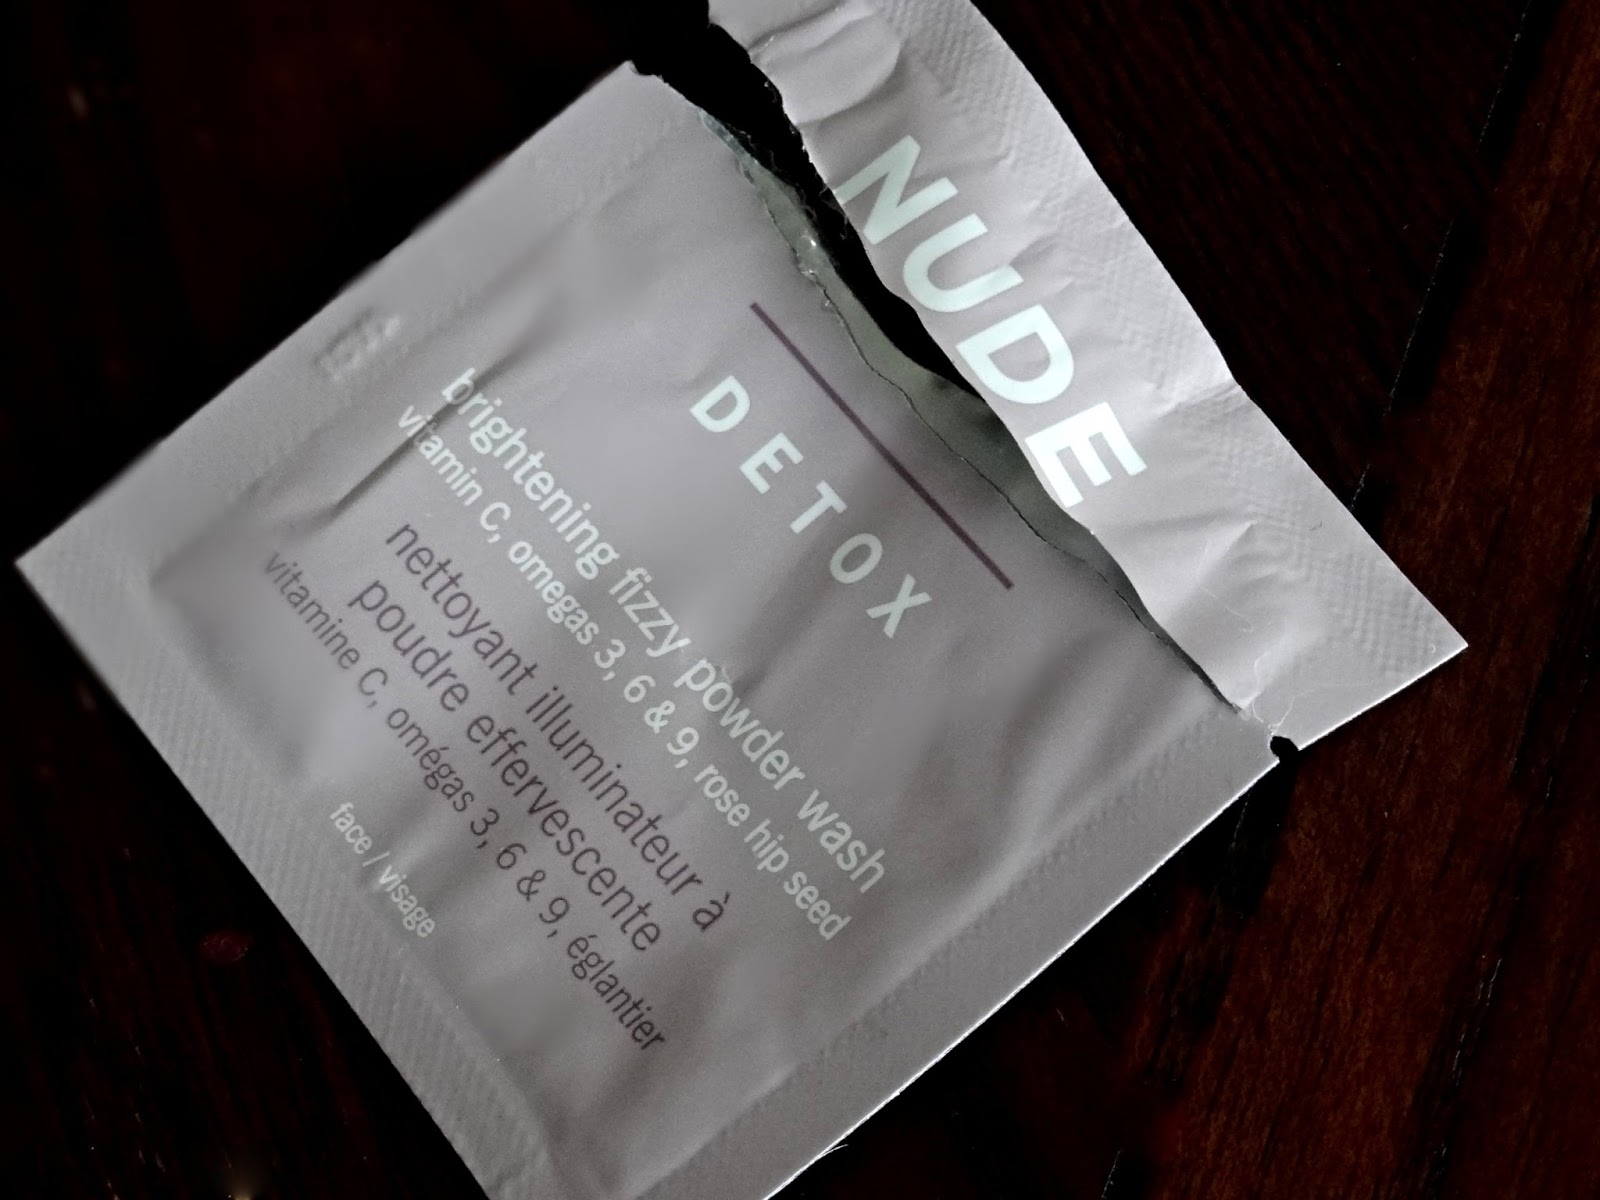 Nude Skincare Detox Brightening Fizzy Wash Review, Photos